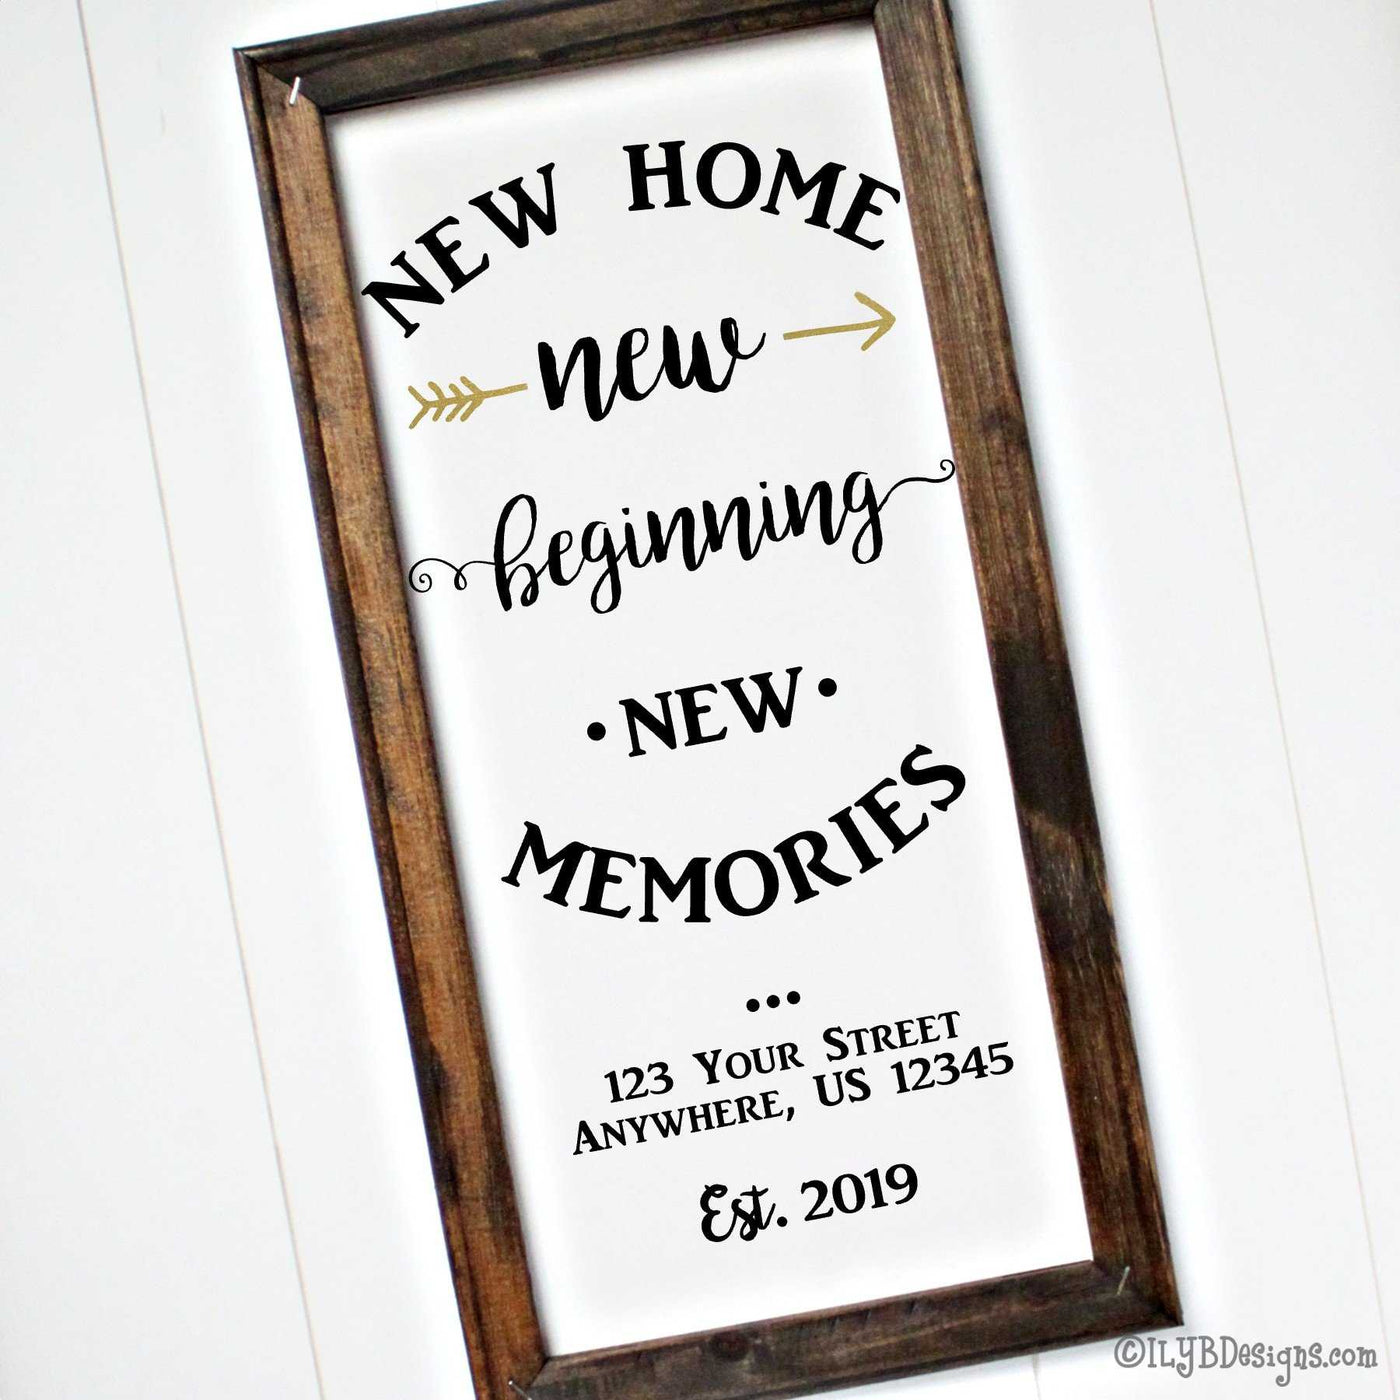 Dark walnut stained frame on a white canvas with black wording in various fonts that says, "New home, new beginning, new memories."  A metallic gold arrow is split on each side of the first "new." Under the saying is the option to add an address and an established year. 